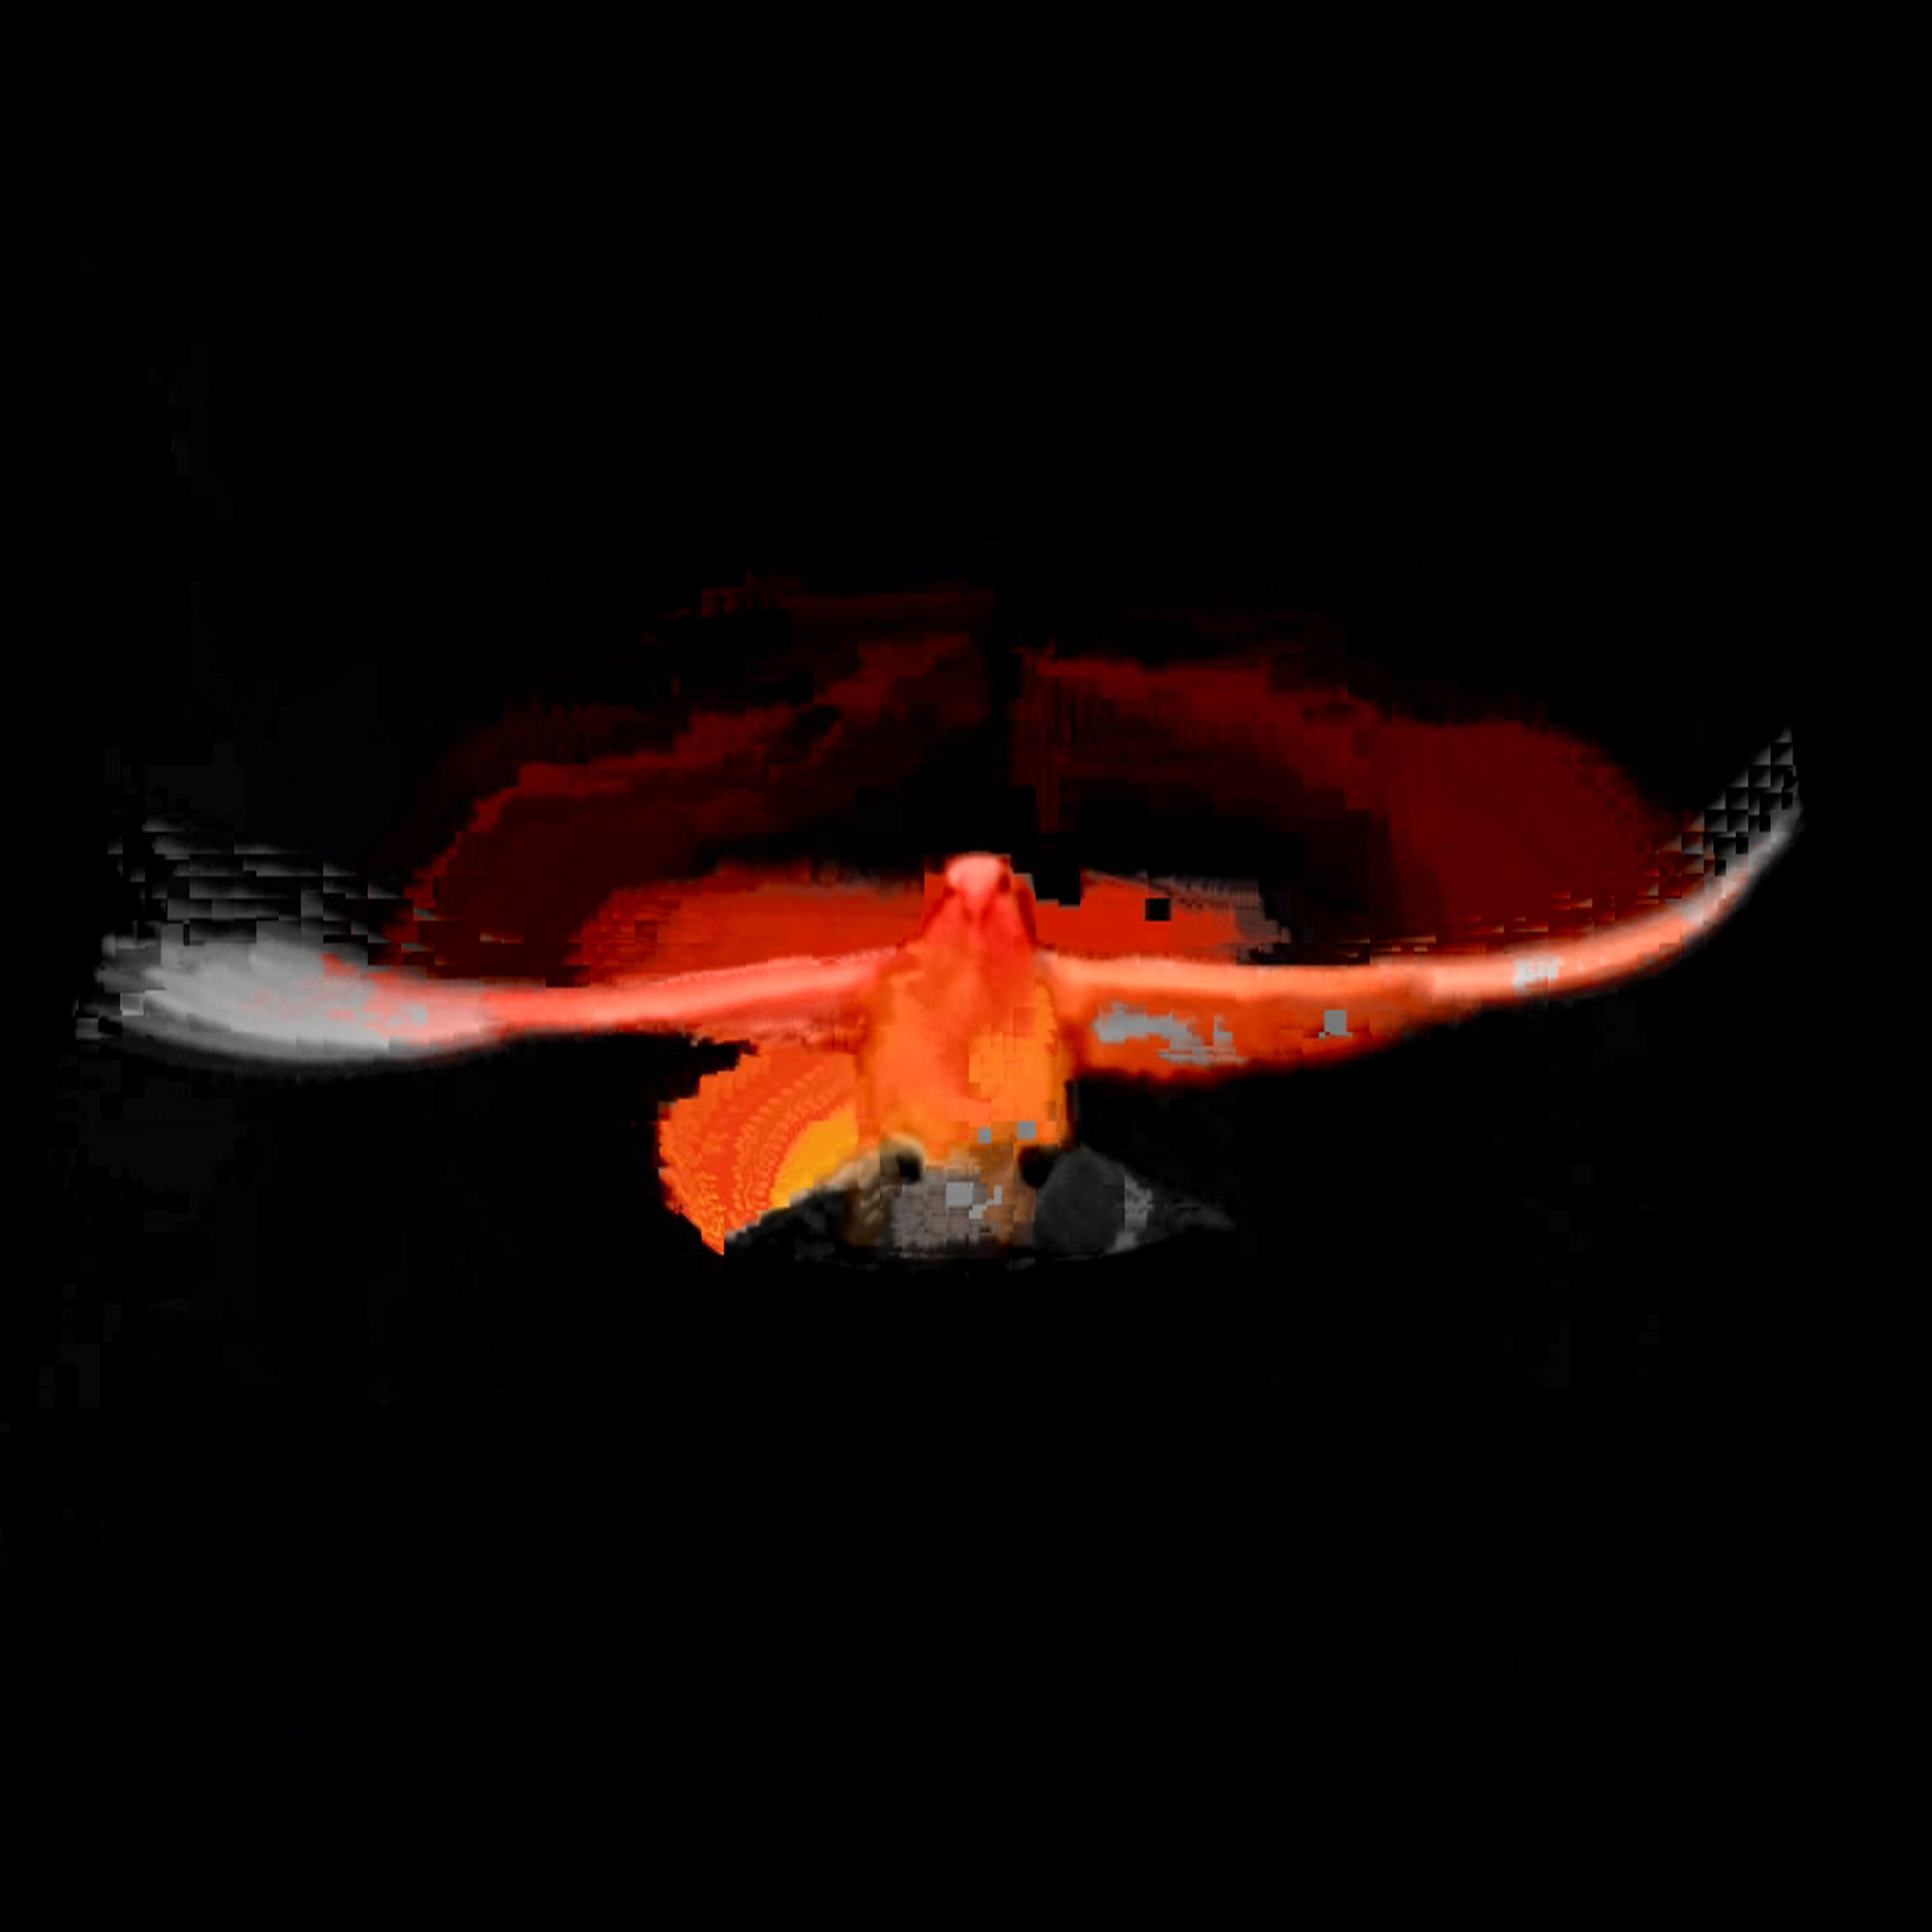 Detail from the digital film showing a pixelated image of a bird in flight